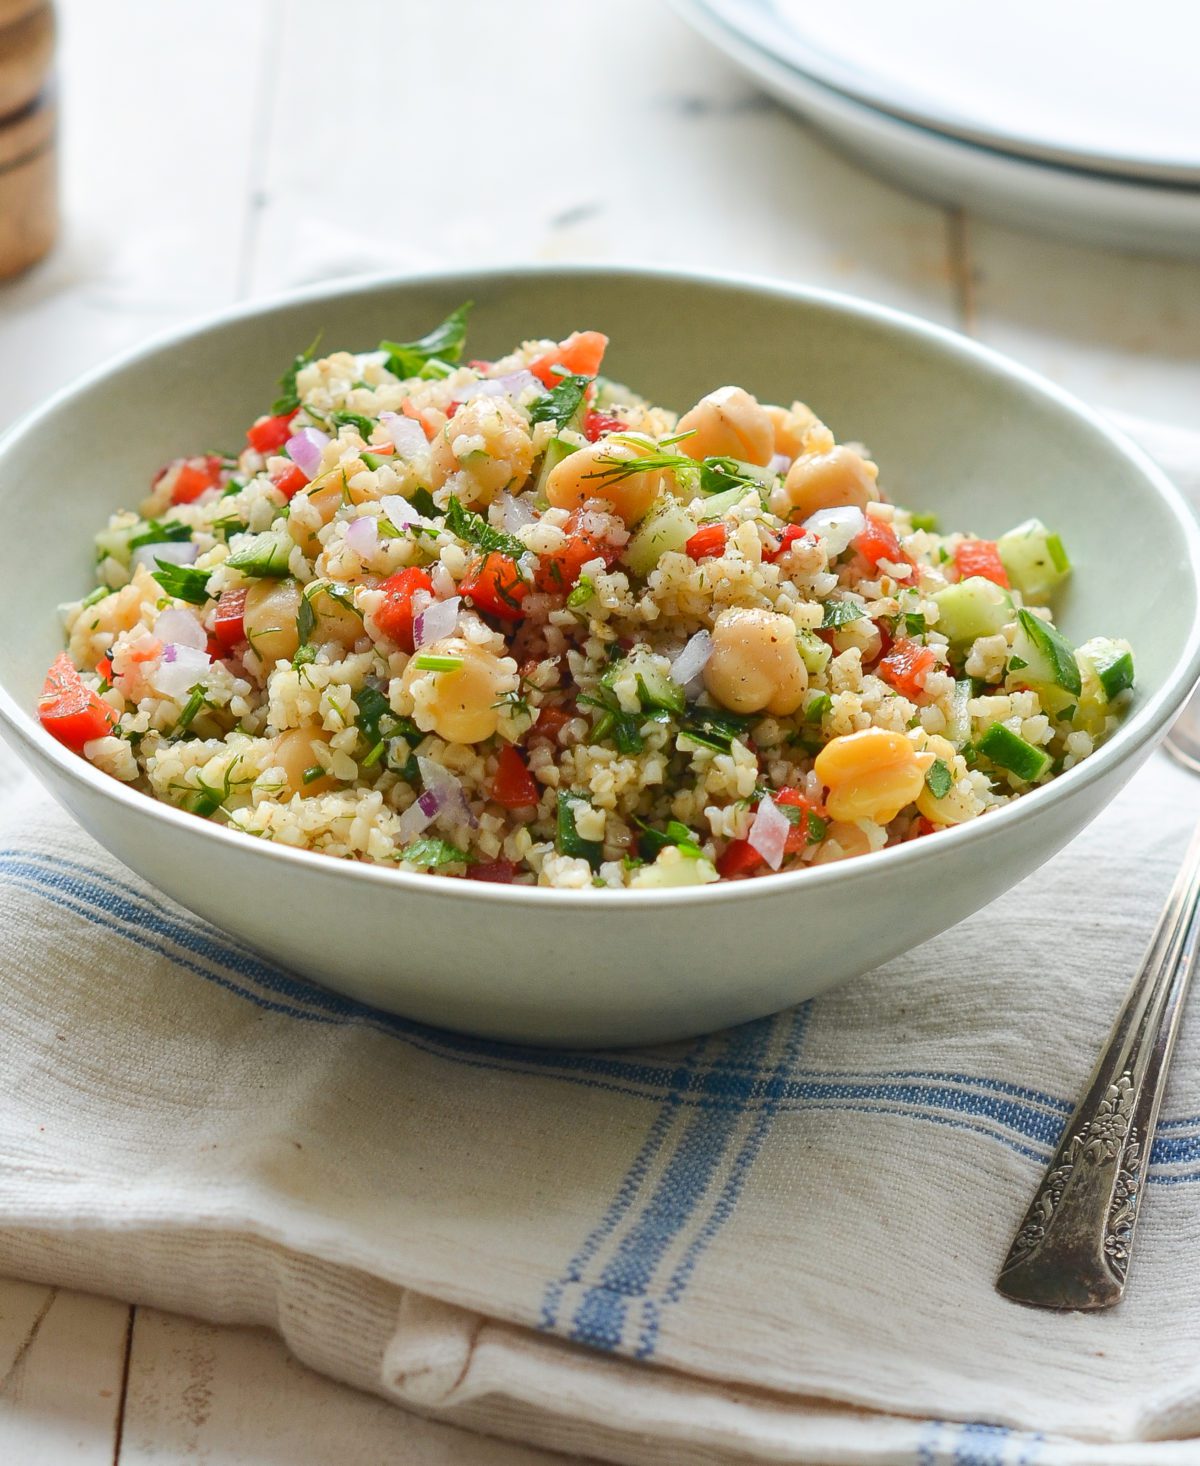 Bulgur Salad with Cucumbers, Red Peppers, Chick Peas, Lemon and Dill